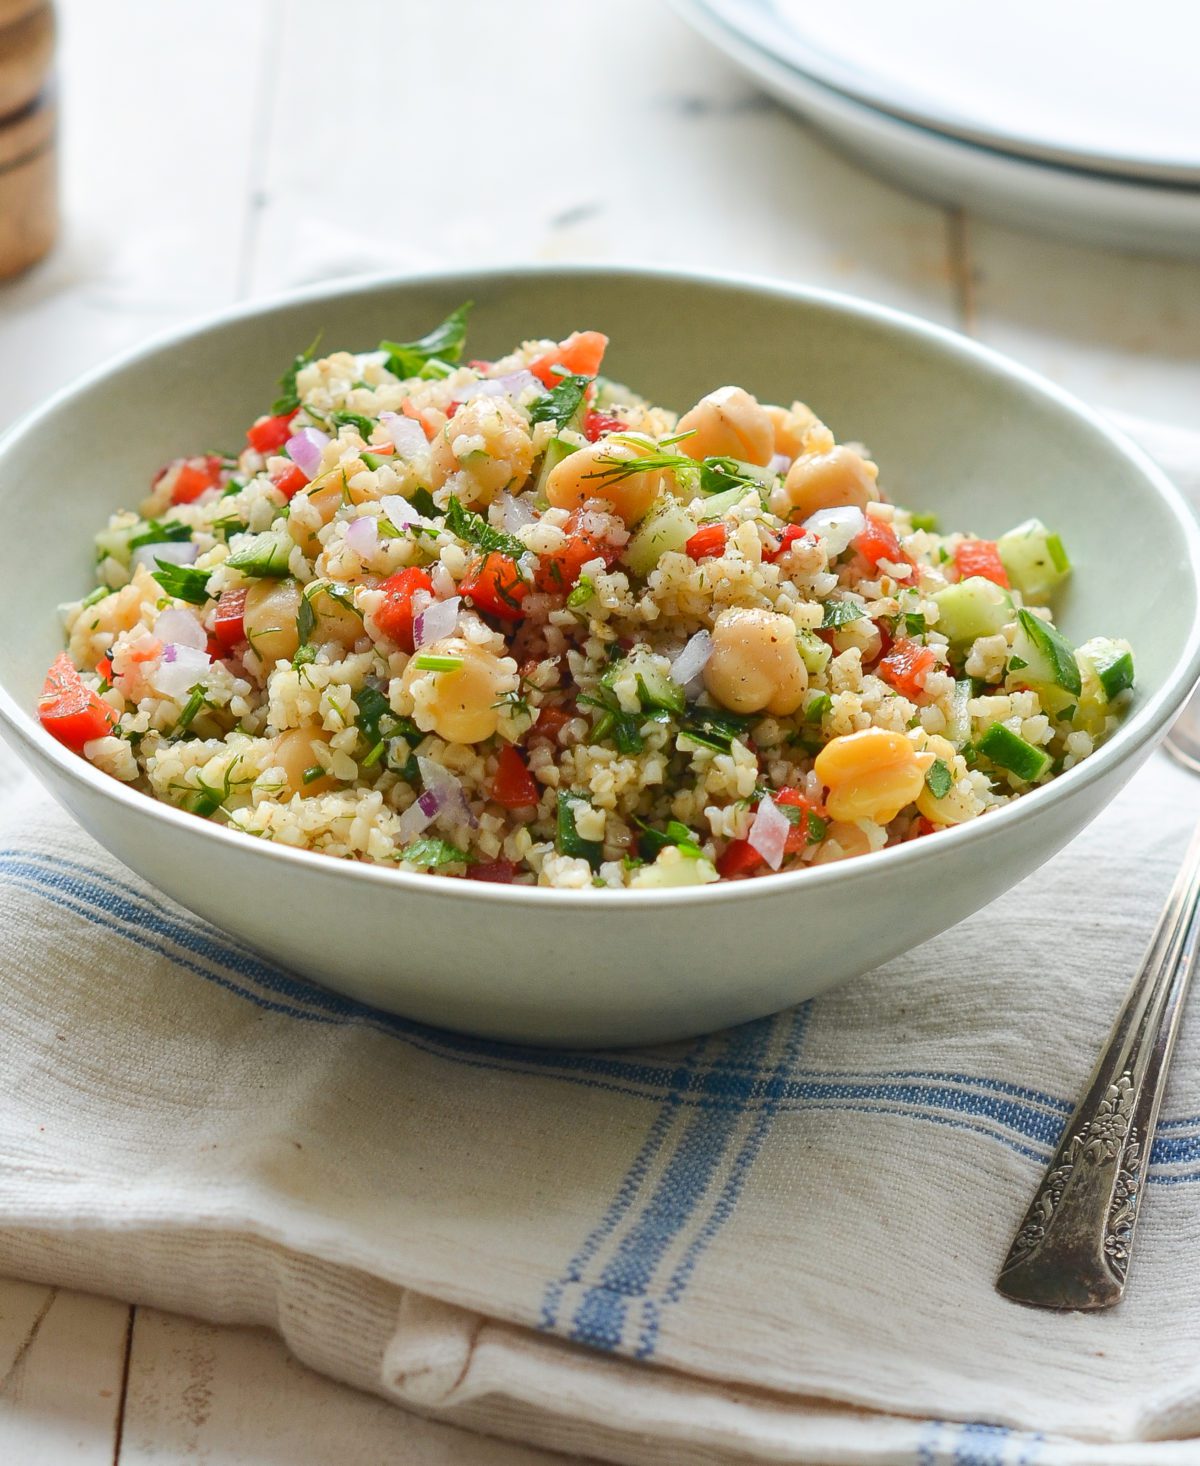 Bulgur Salad with Cucumbers, Red Peppers, Chick Peas, Lemon and Dill